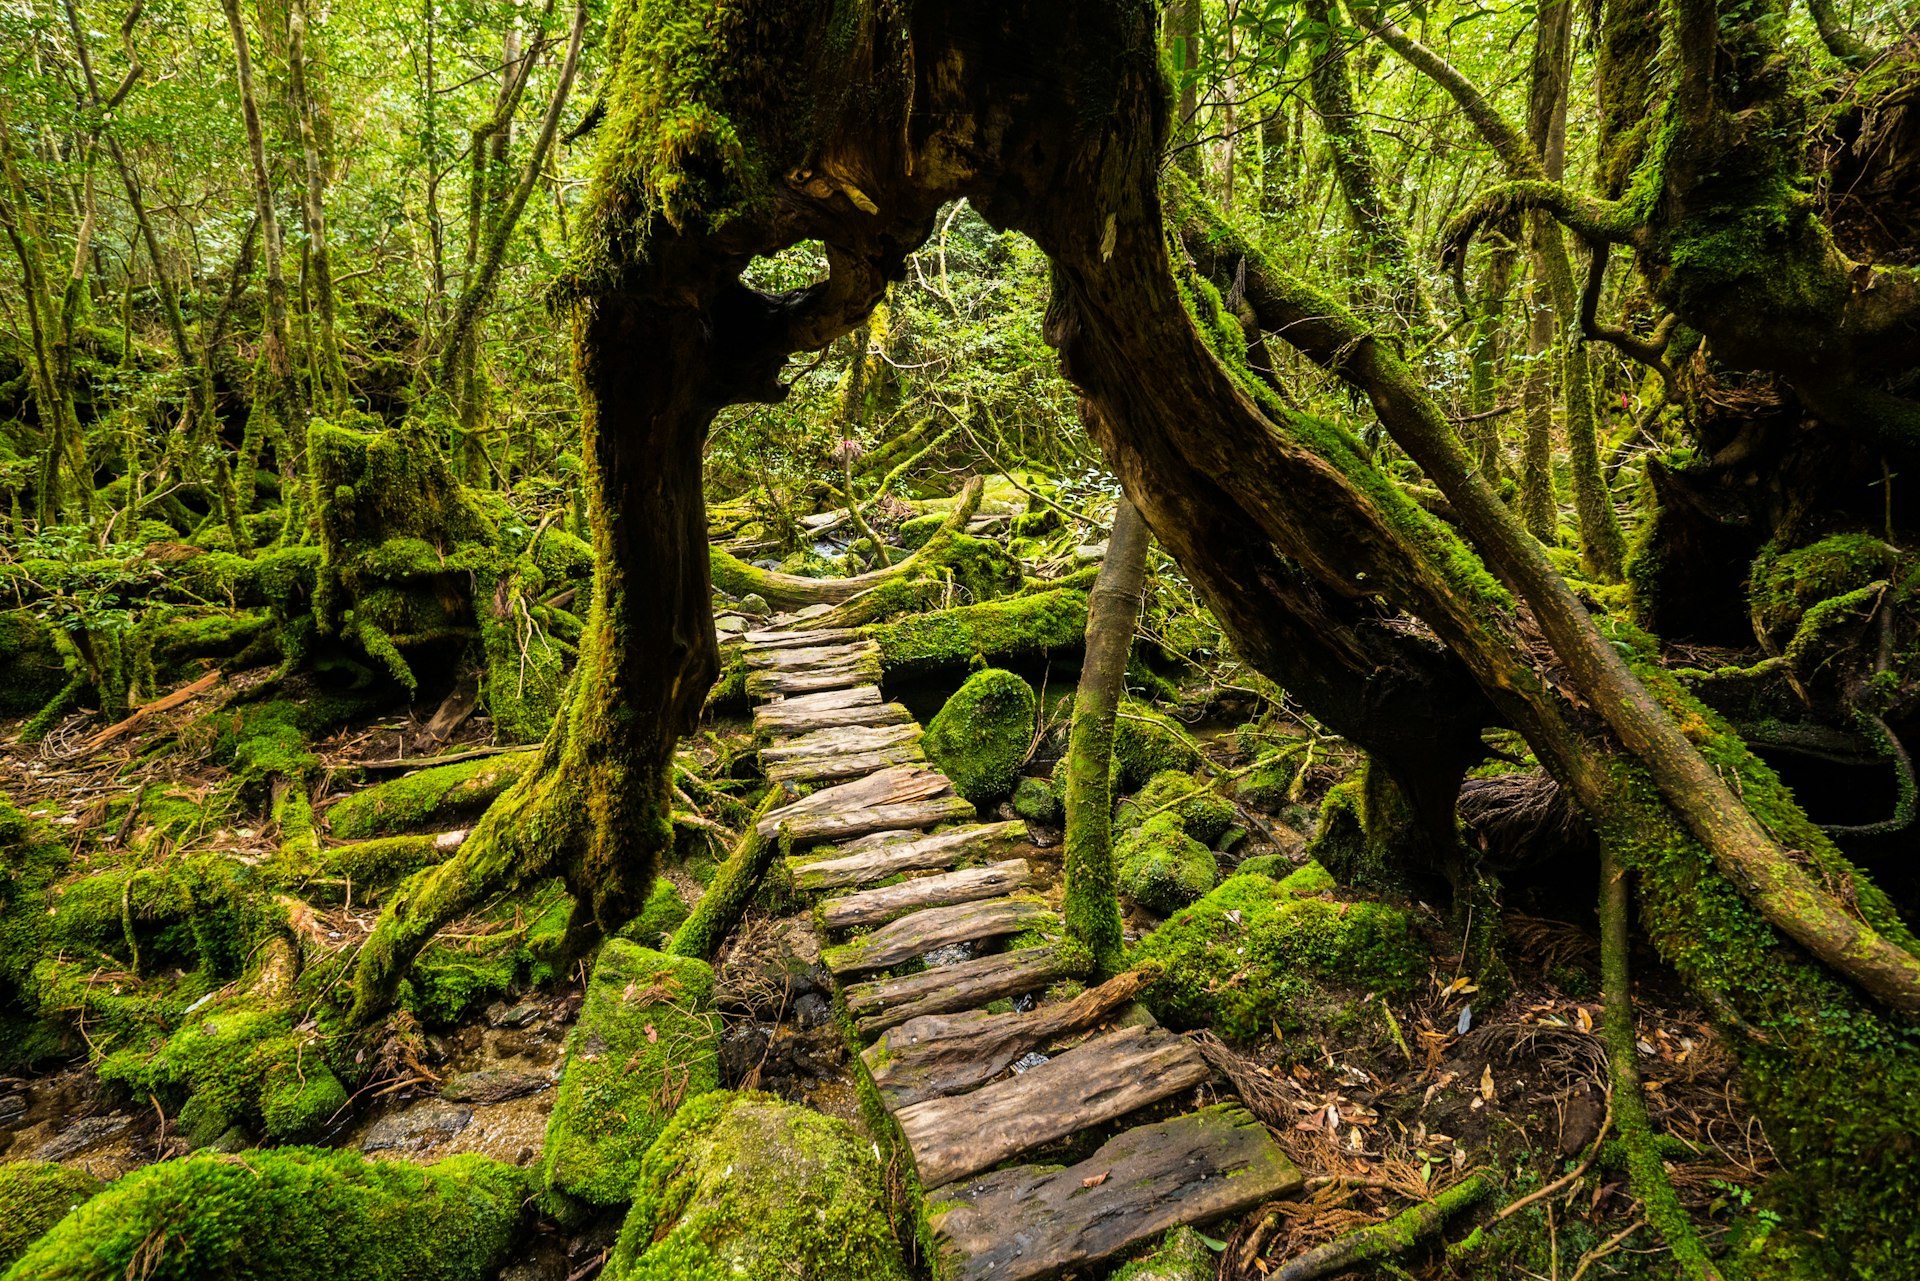 A forest walkway on the island of Yakushima that goes through the trunk of a giant cedar tree.